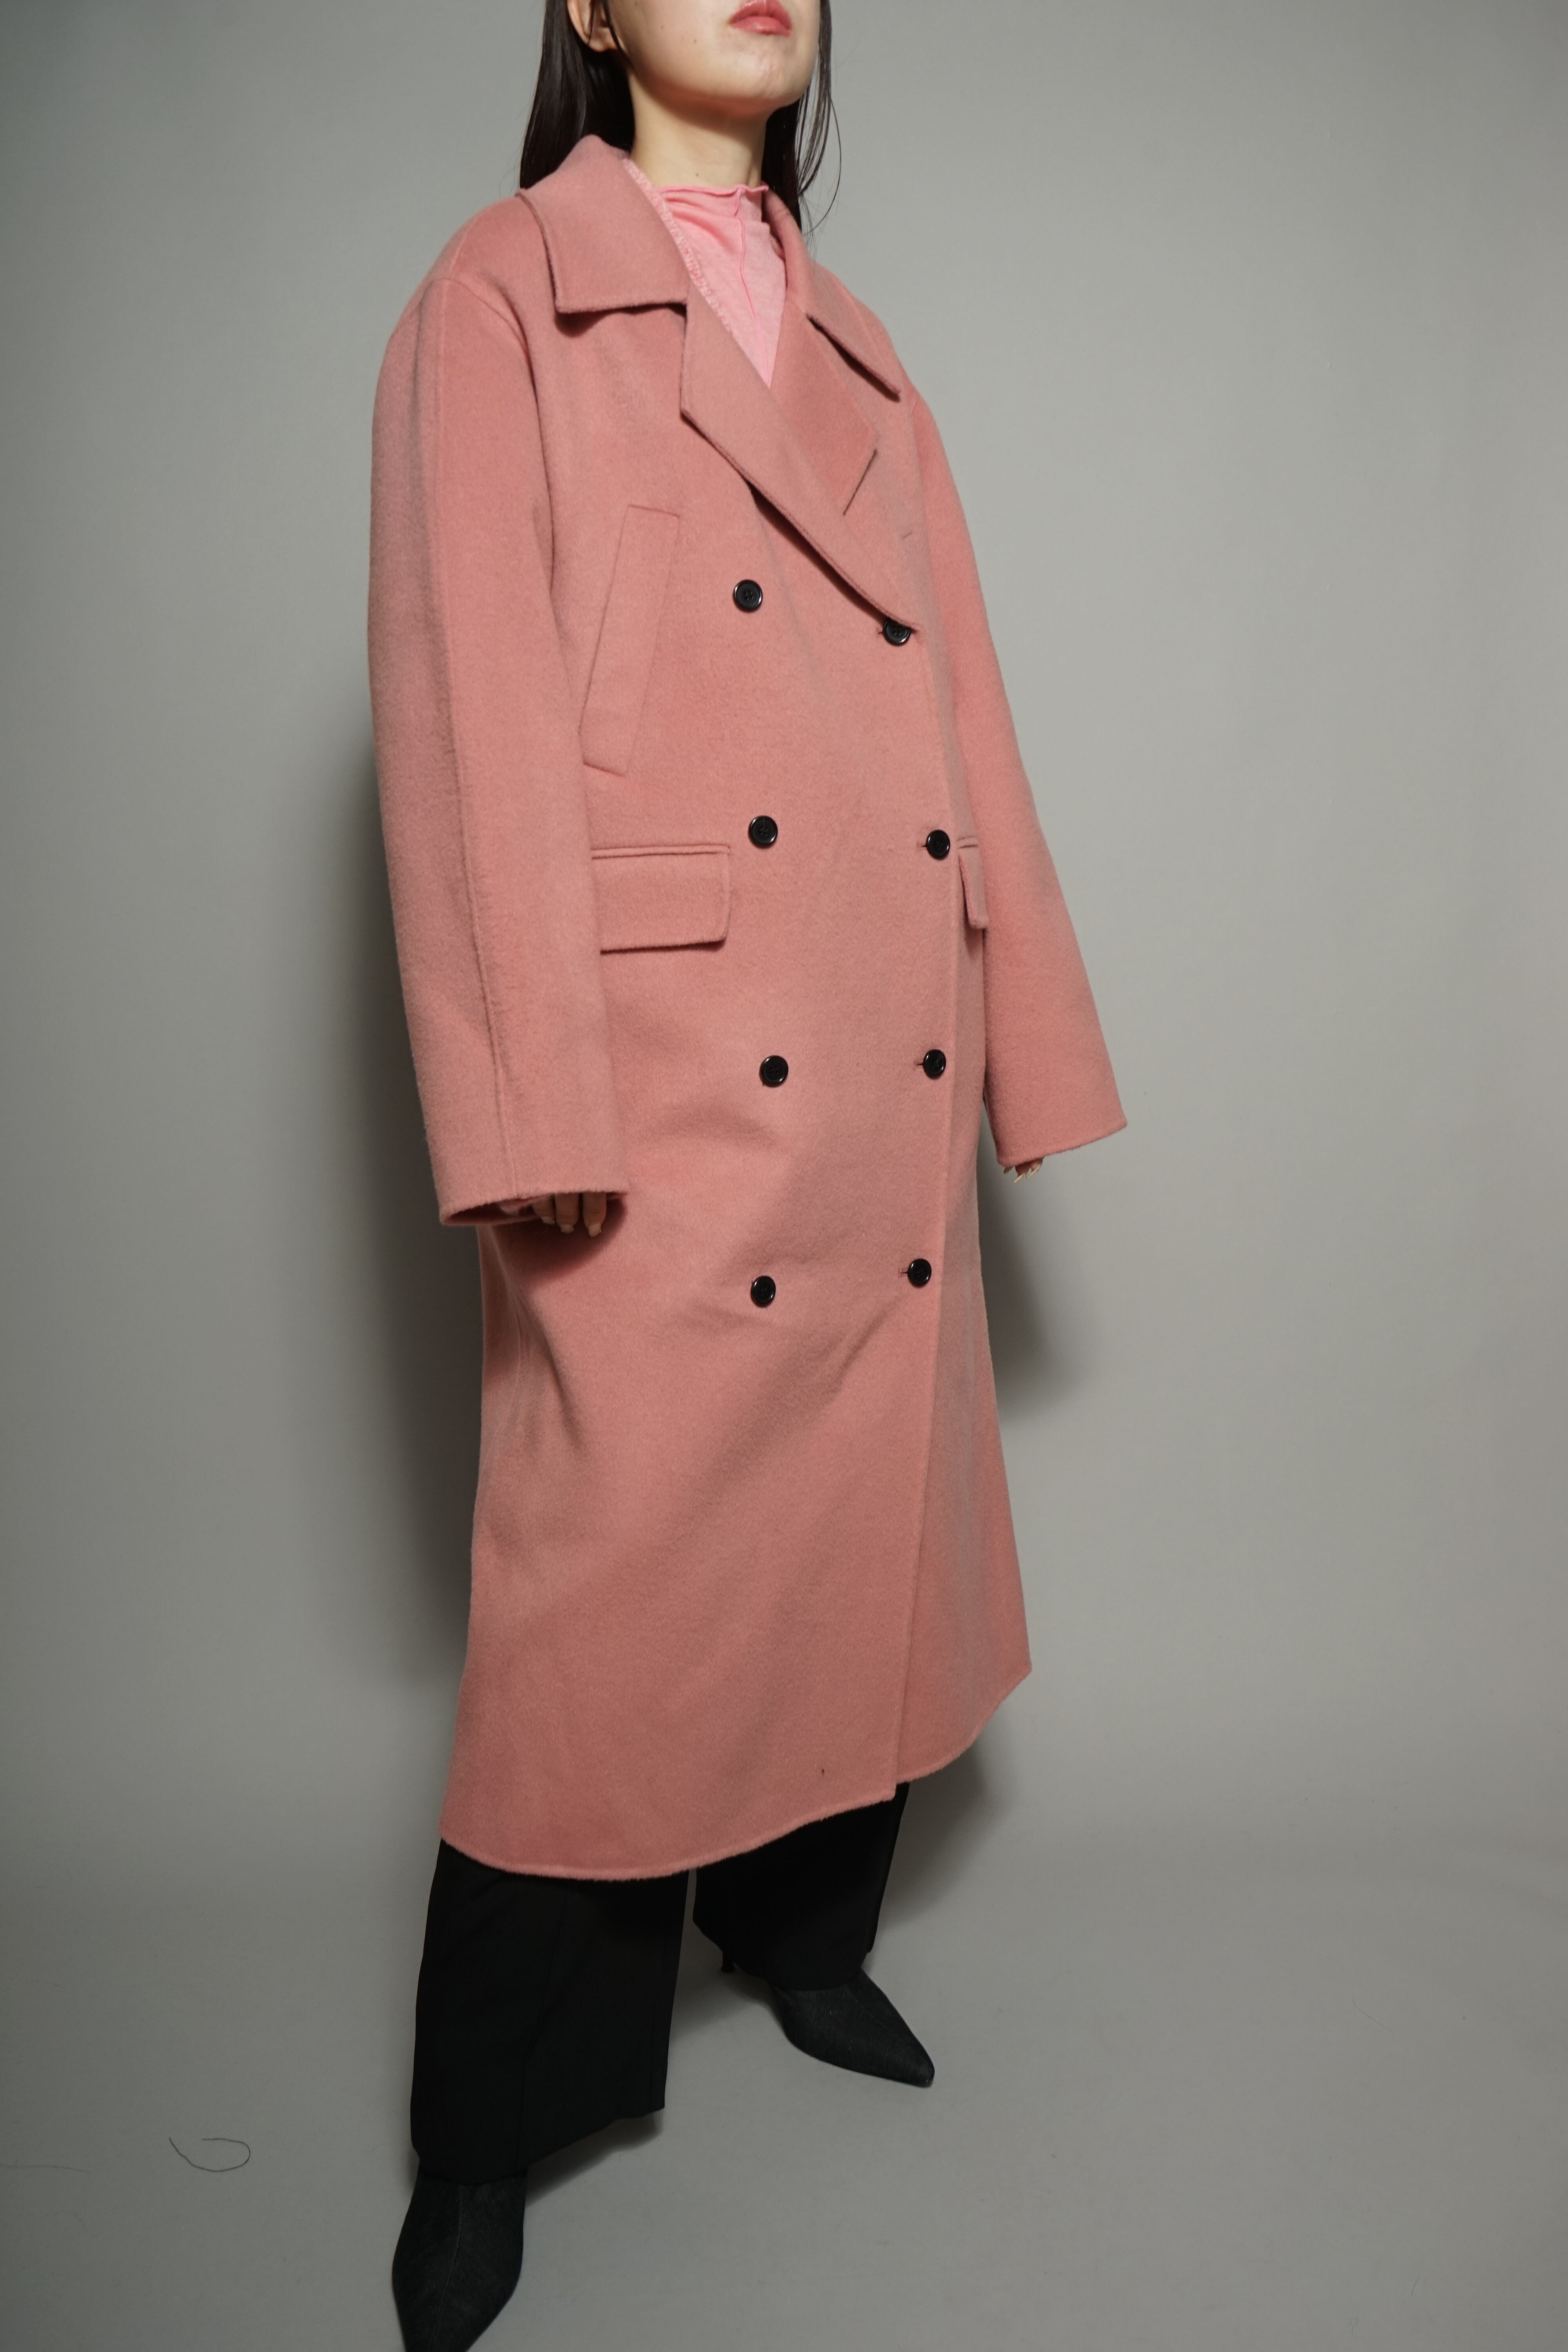 DOUBLE-BREASTED WOOL COAT  (PINK) 2311-521-318